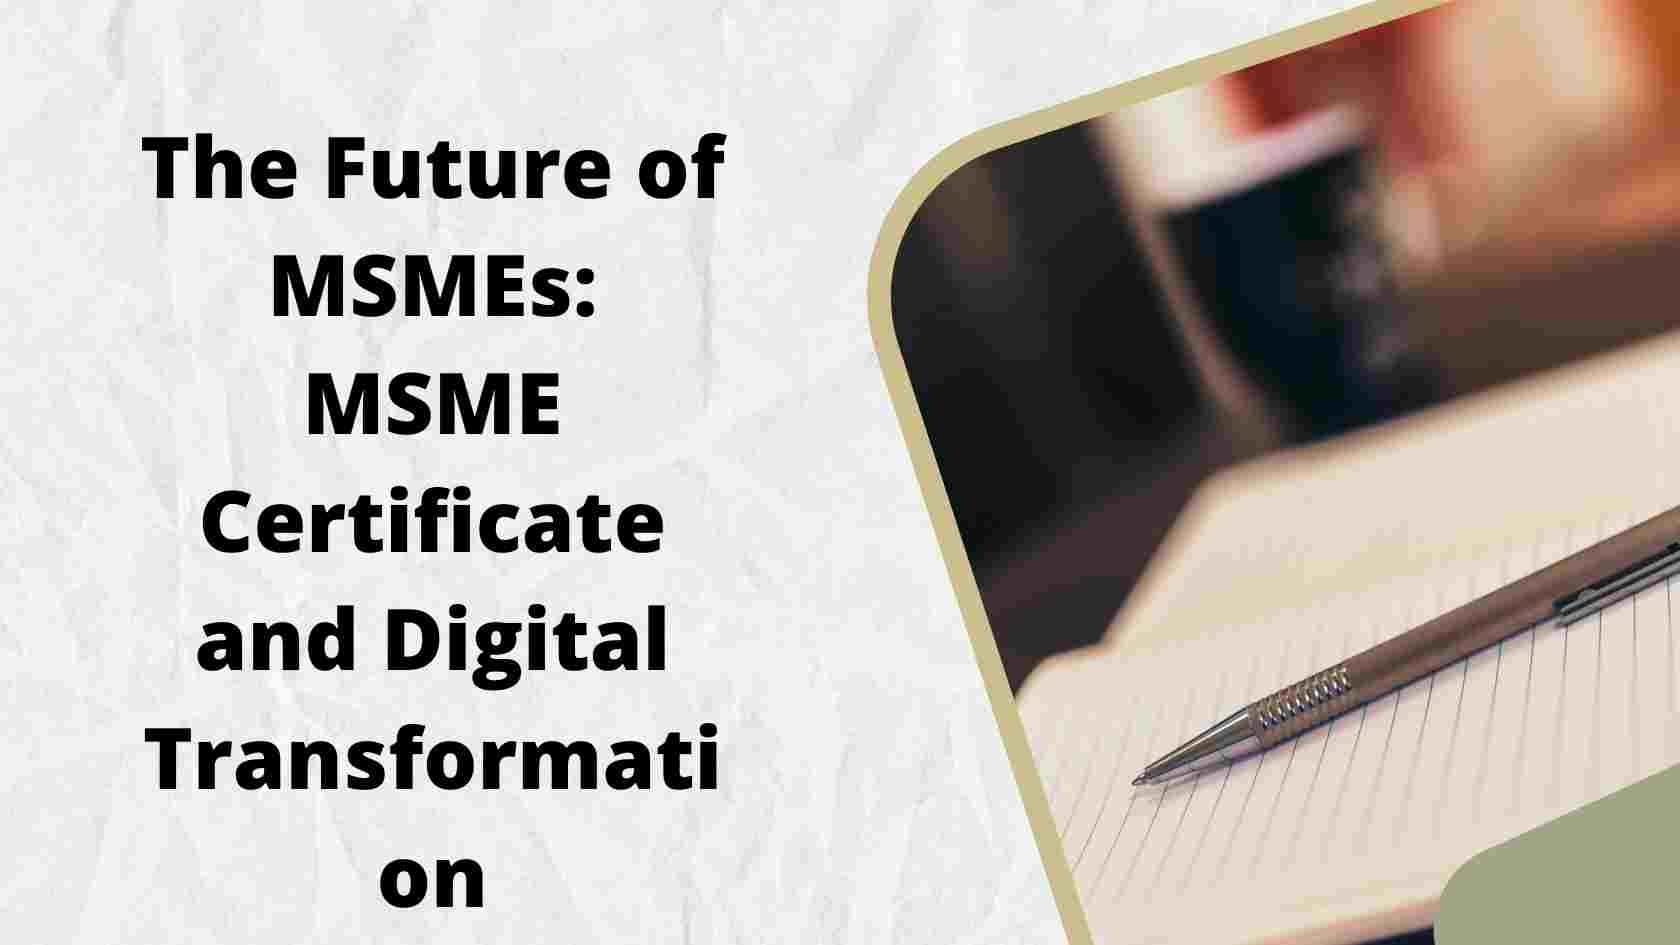 The Future of MSMEs MSME Certificate and Digital Transformation